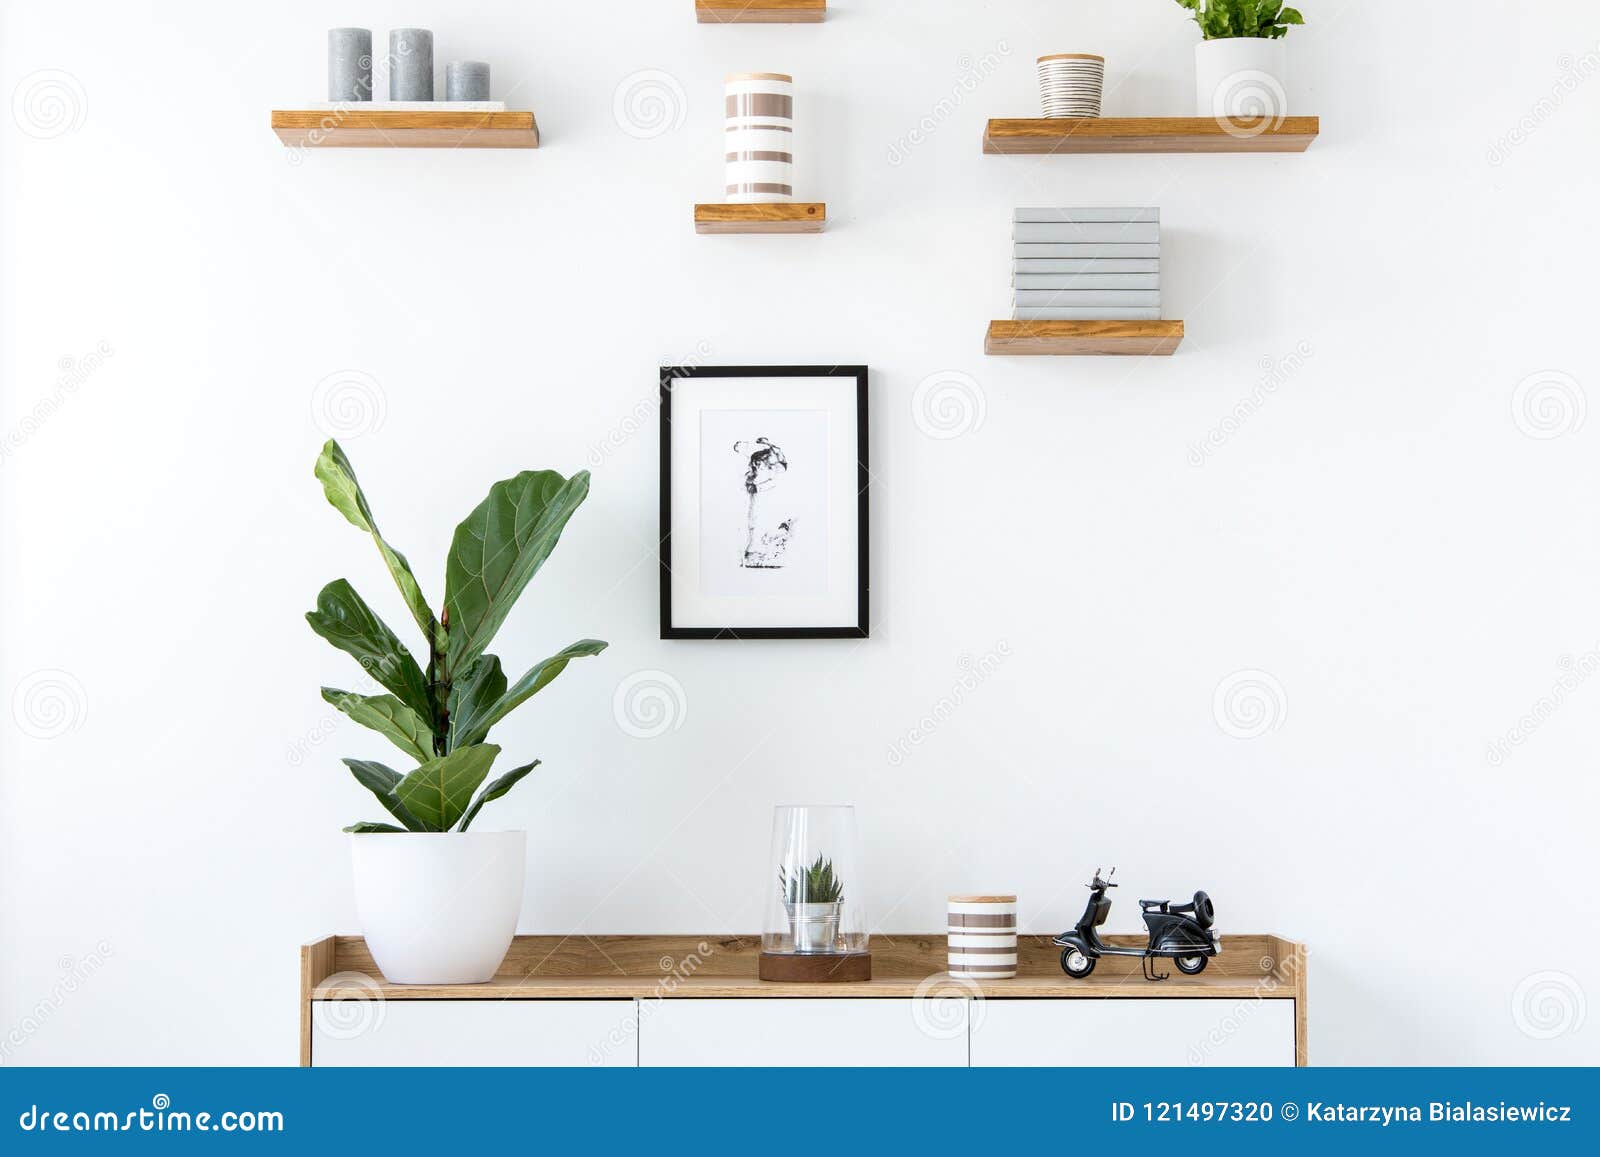 plant on wooden cupboard in minimal flat interior with poster an